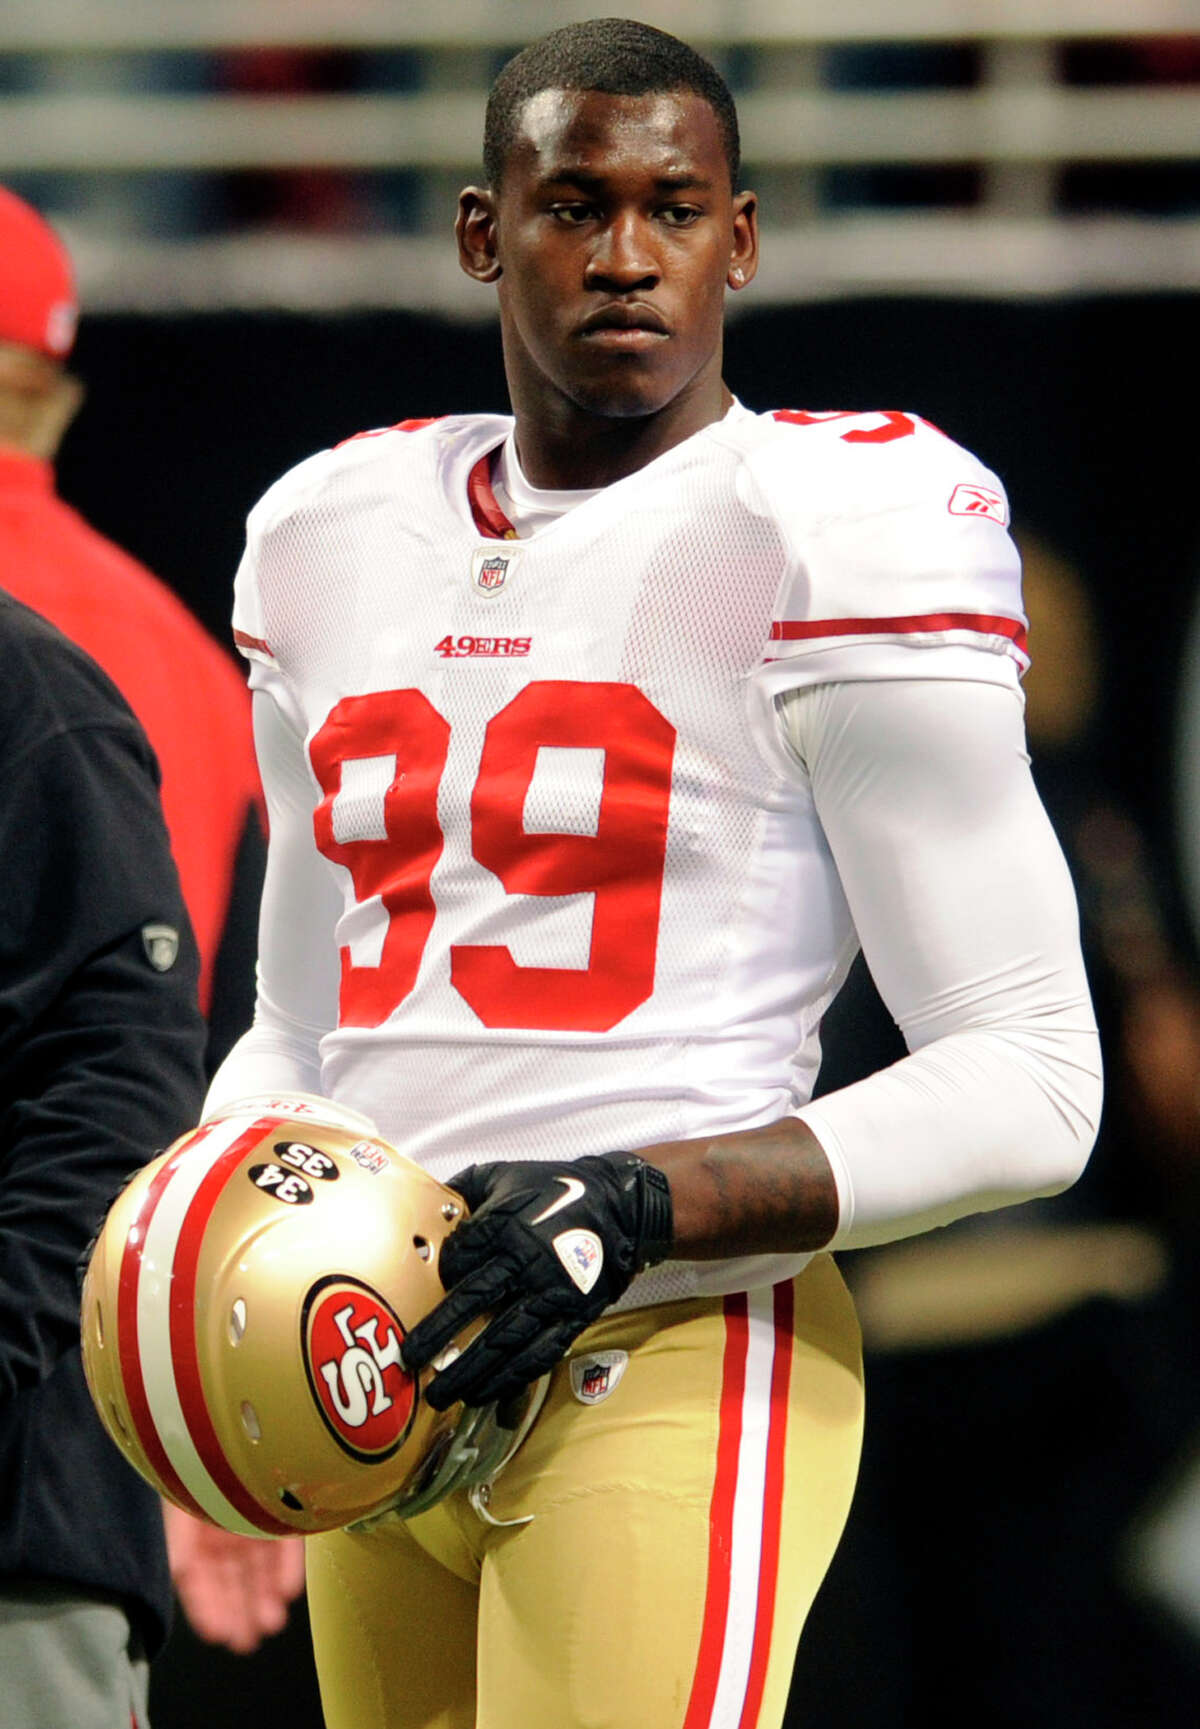 Around sports: 49ers' Smith stabbed